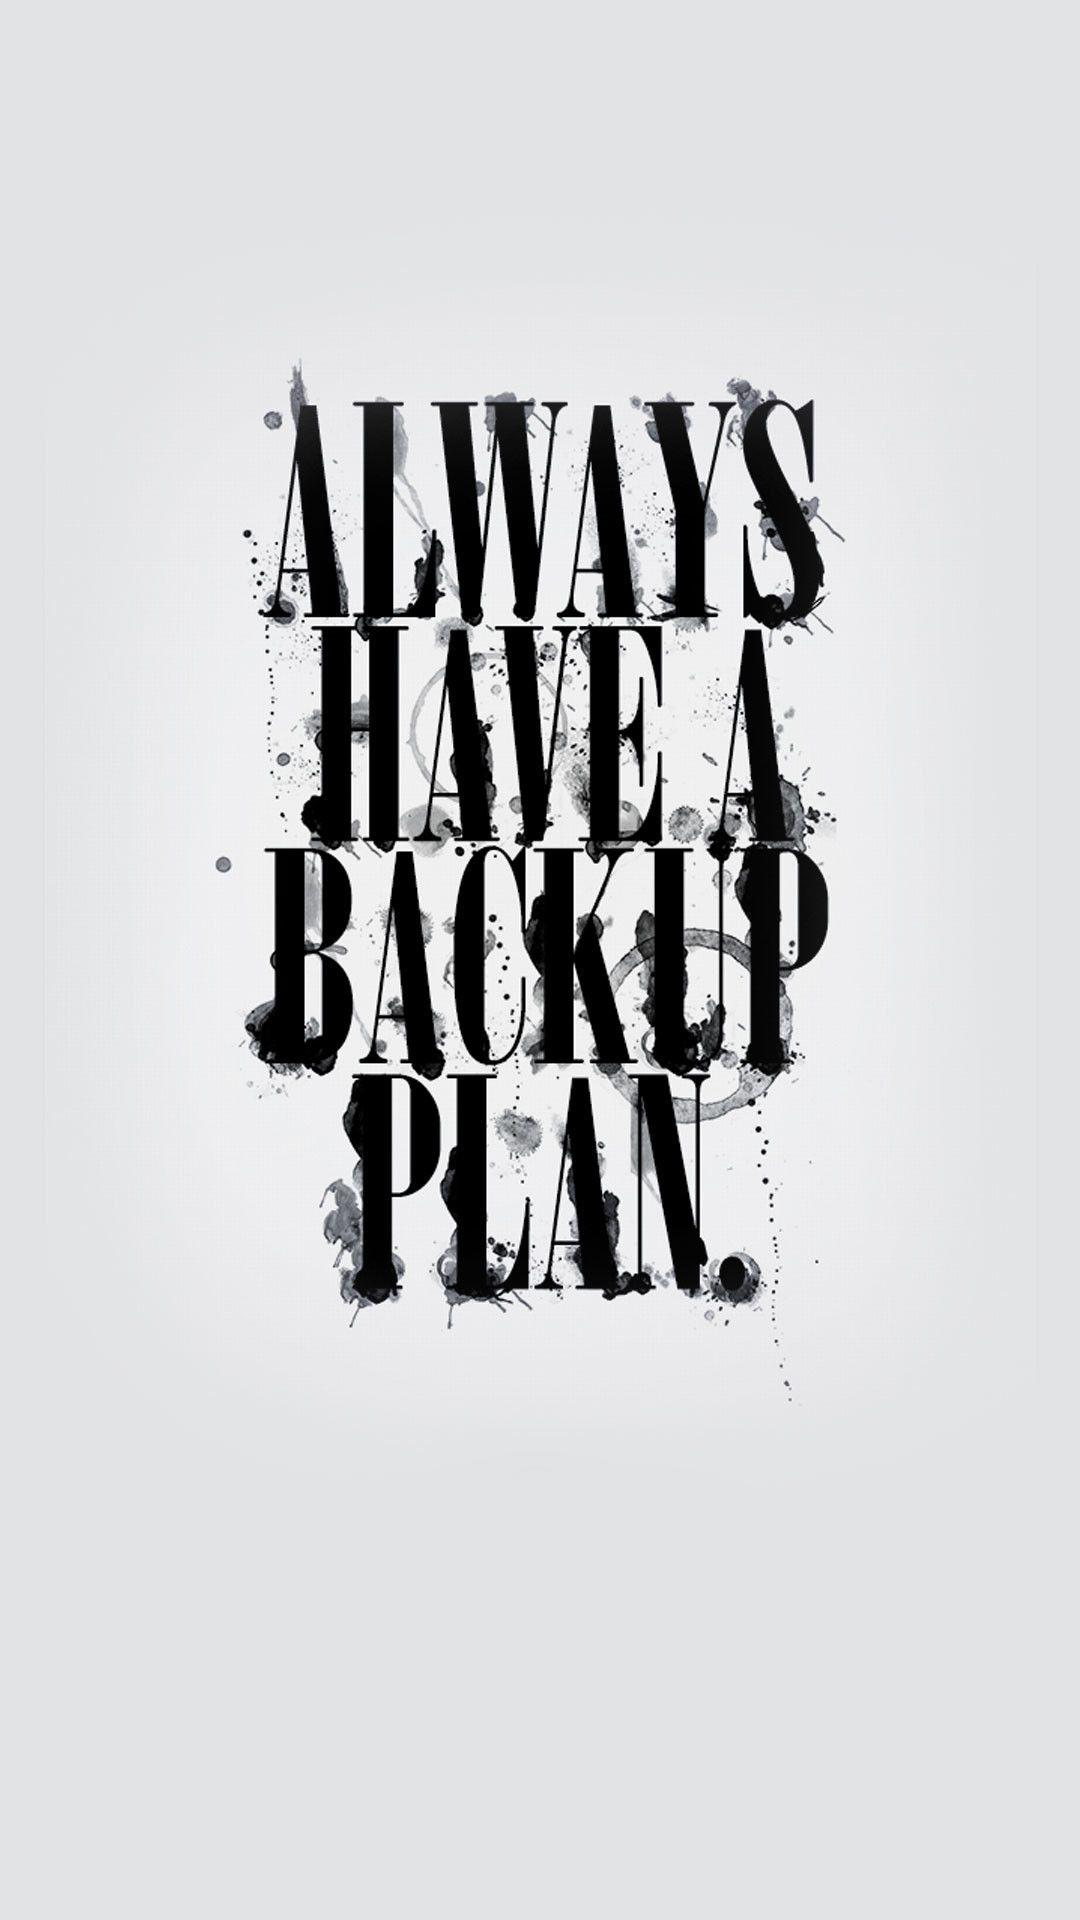 Cool Quote for iPhone Wallpaper Free Cool Quote for iPhone